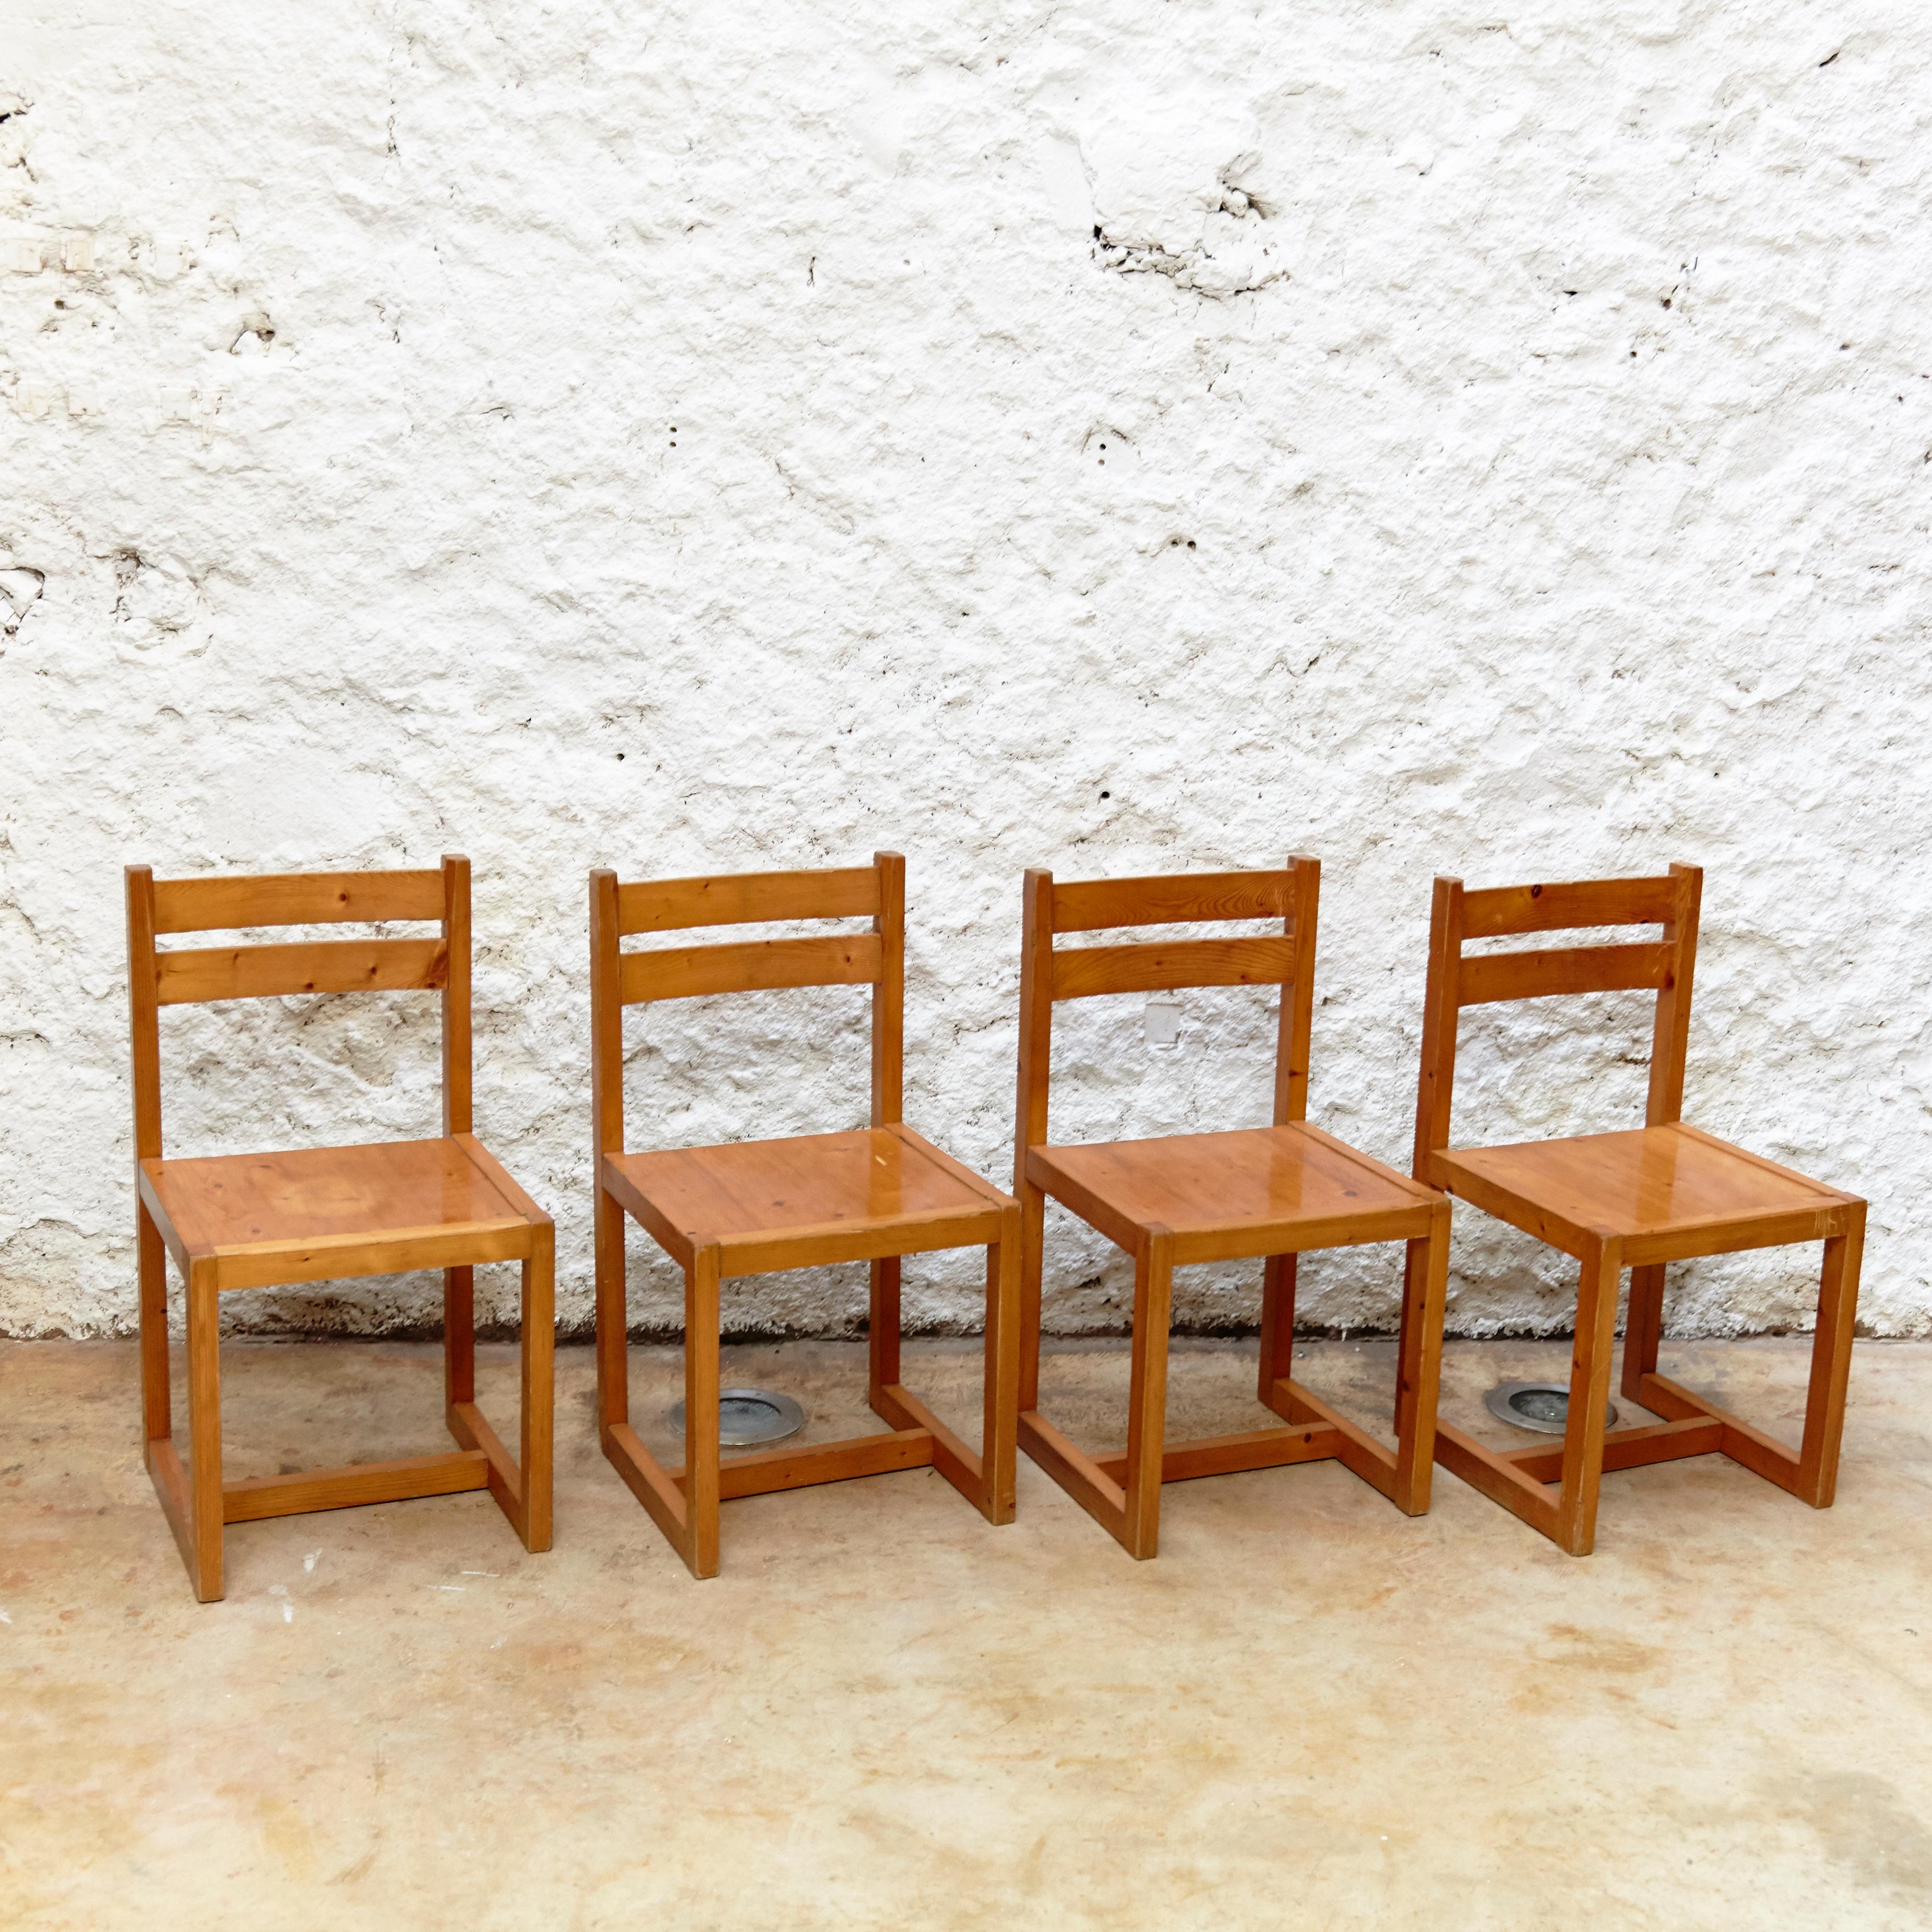 Set of four Mid-Century Modern Racionalist wood chairs from France, circa 1960
By Unknown Designer and Manufacturer.

In good original condition with minor wear consistent of age and use, preserving a beautiful patina.